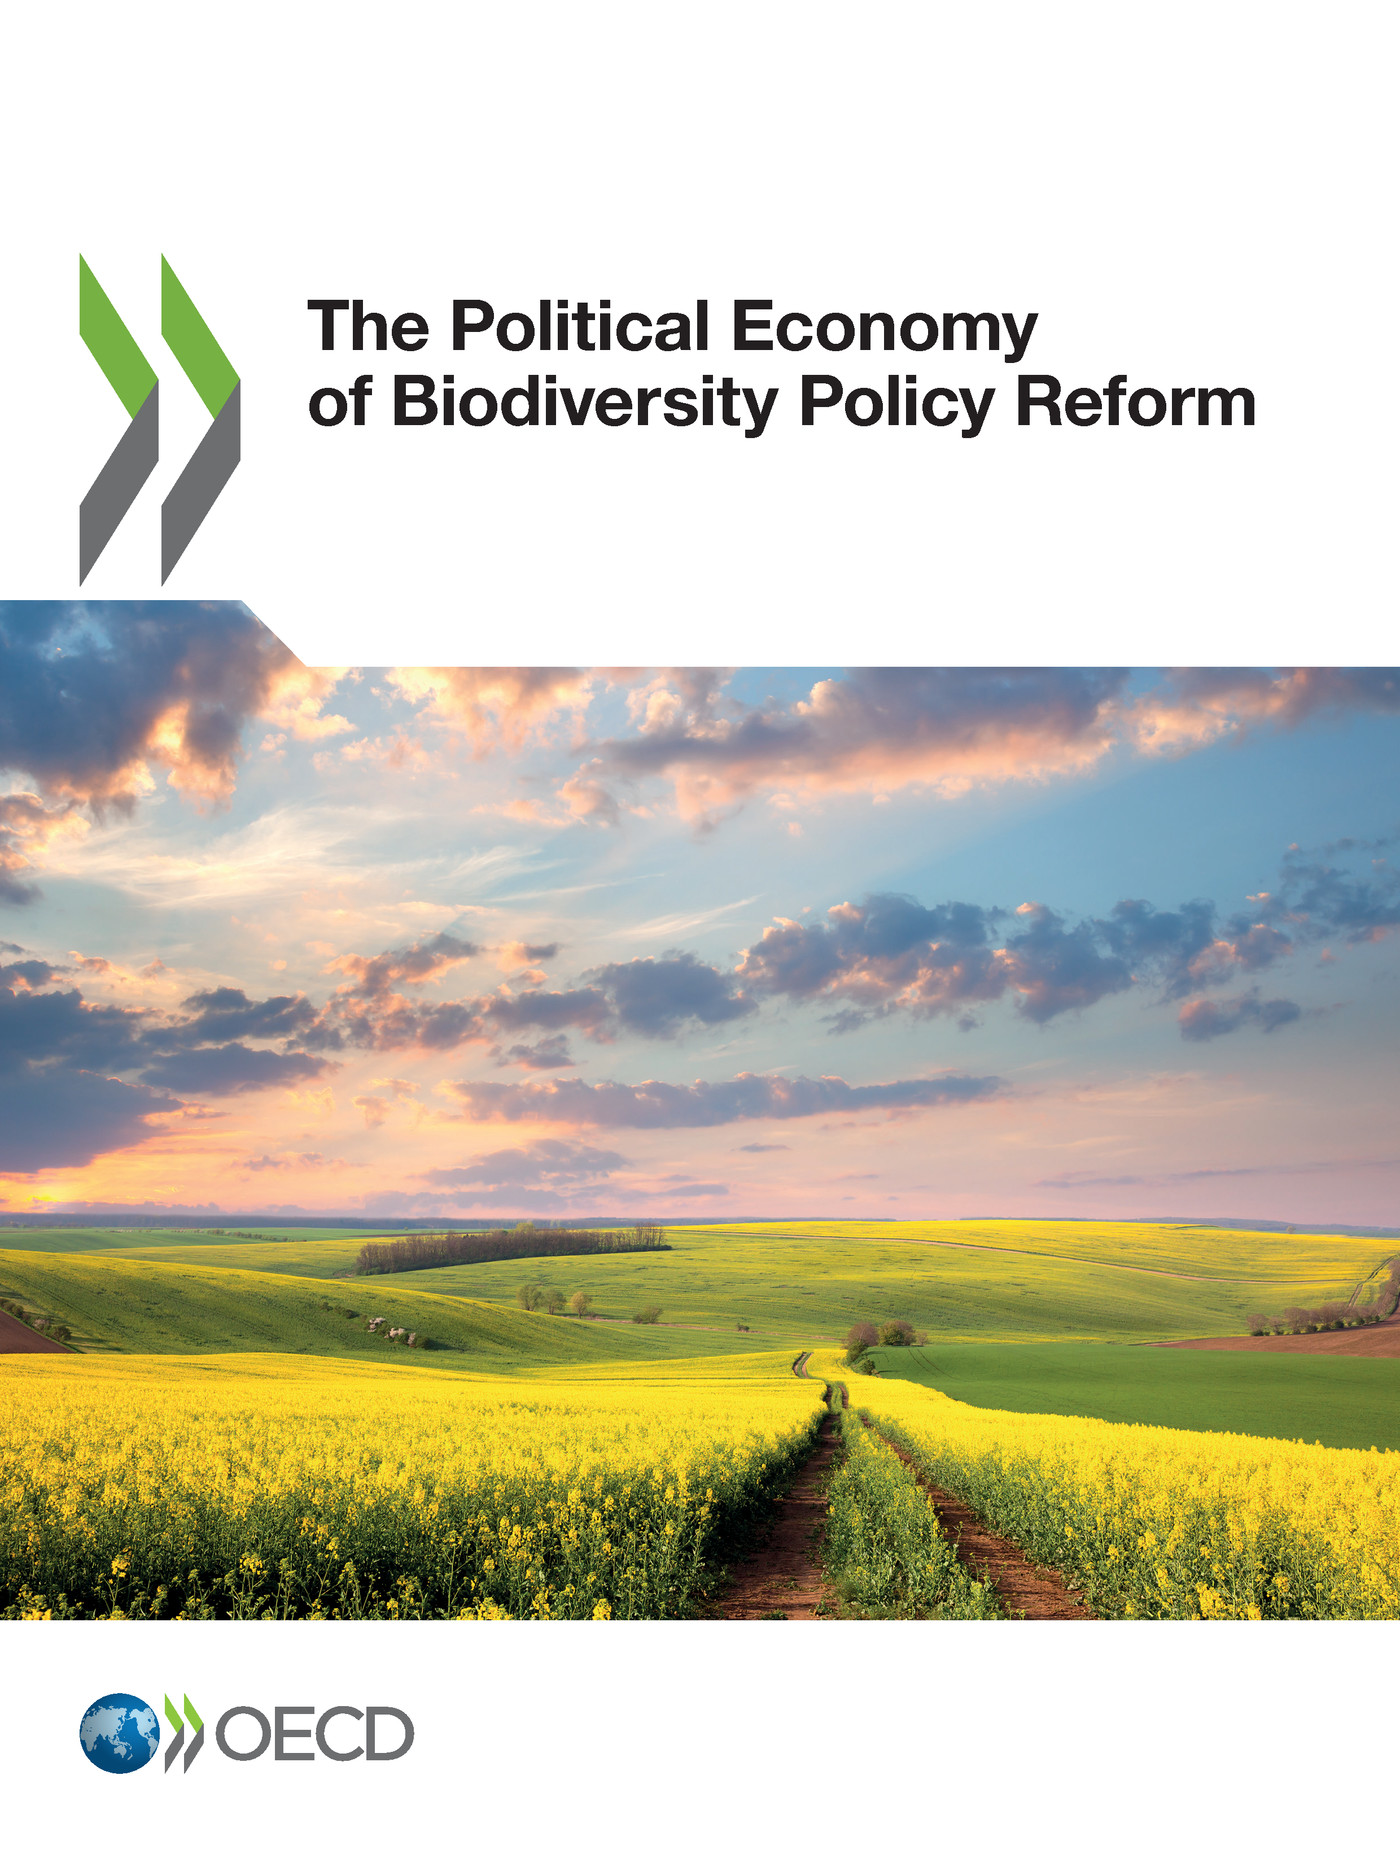 The Political Economy of Biodiversity Policy Reform -  Collectif - OCDE / OECD